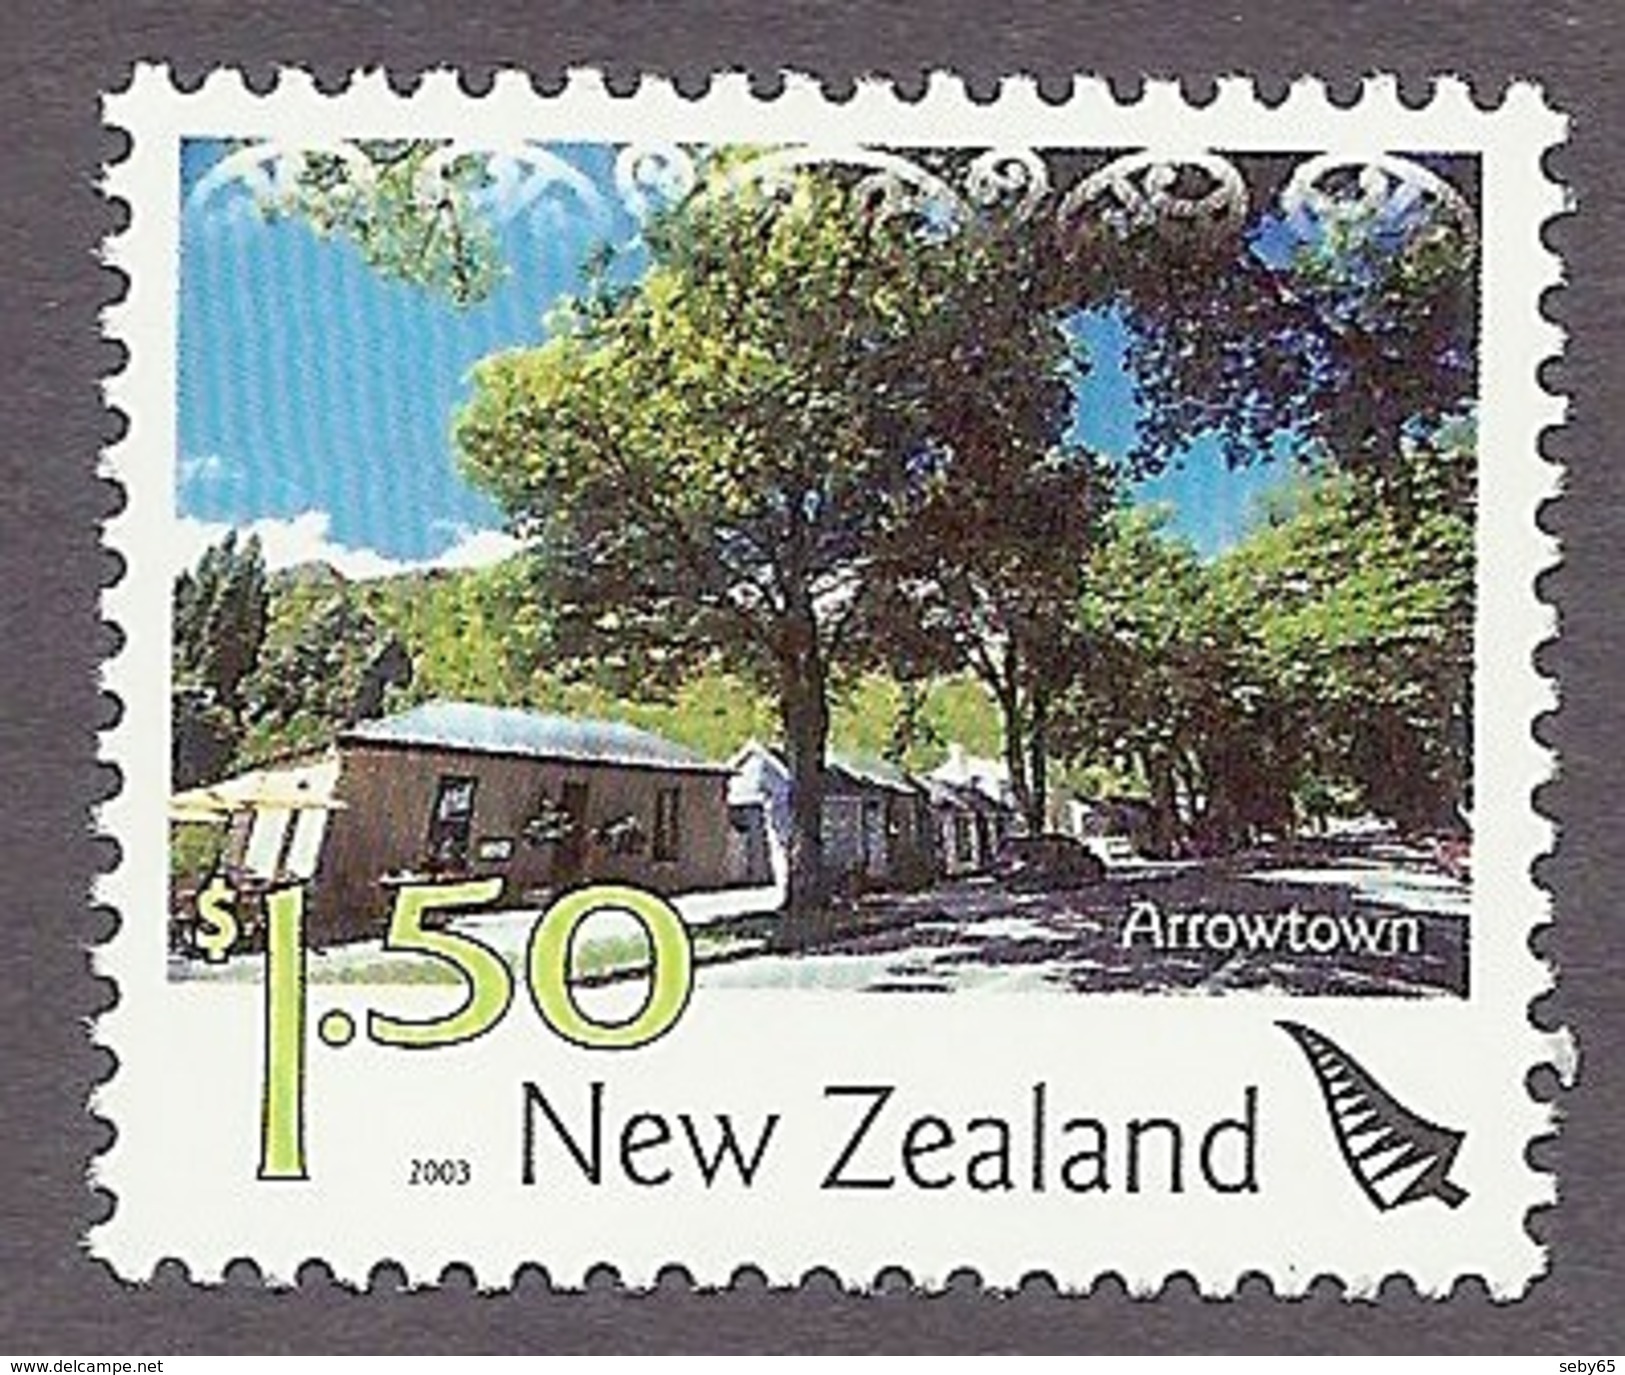 New Zealand 2003 Scenery, Scenic - Arrowtown MNH - Unused Stamps